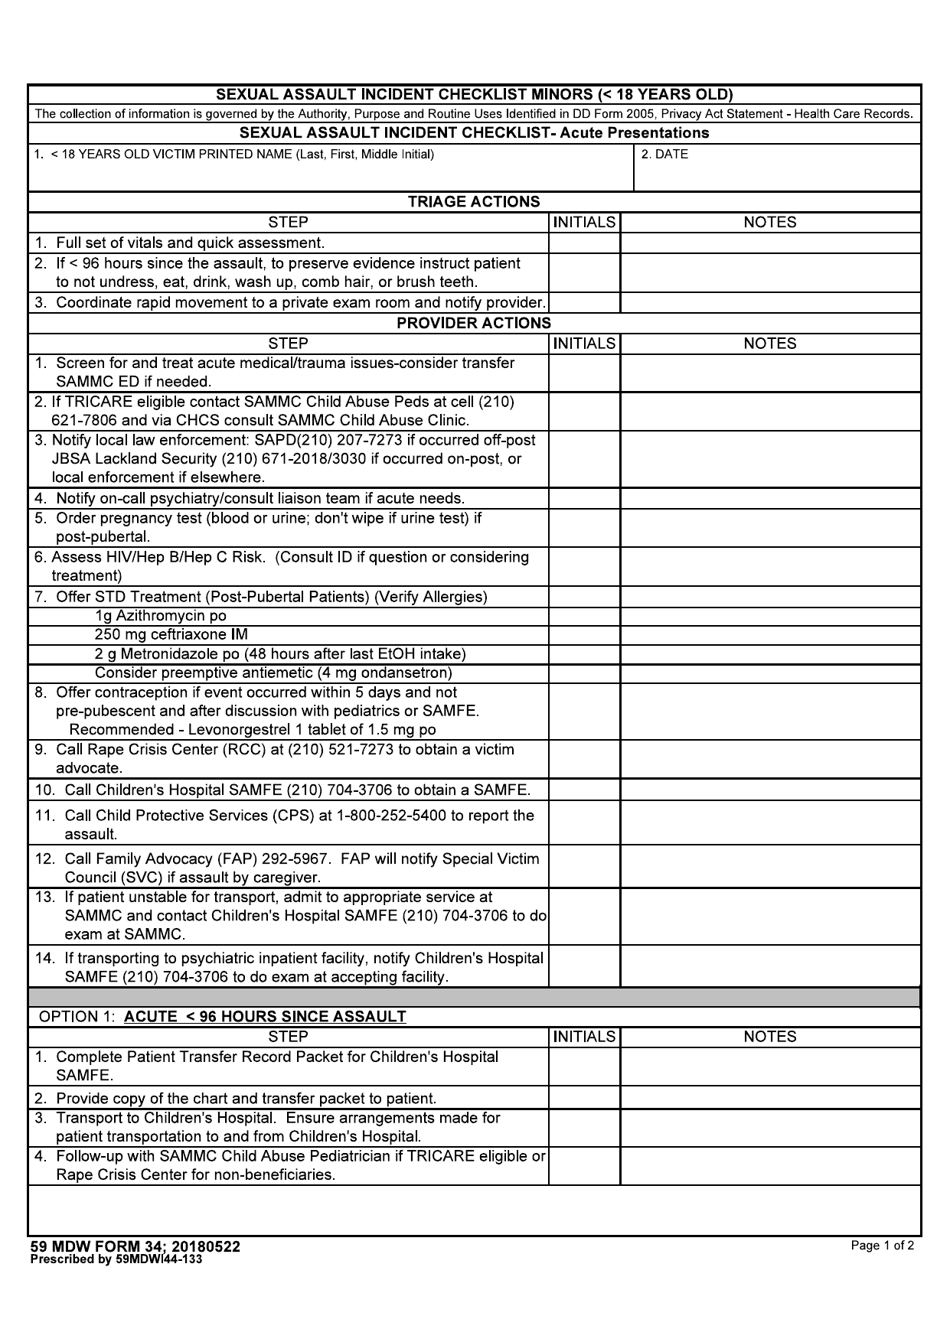 59 MDW Form 34 Sexual Assault Incident Checklist Minors ( 18 Years Old), Page 1